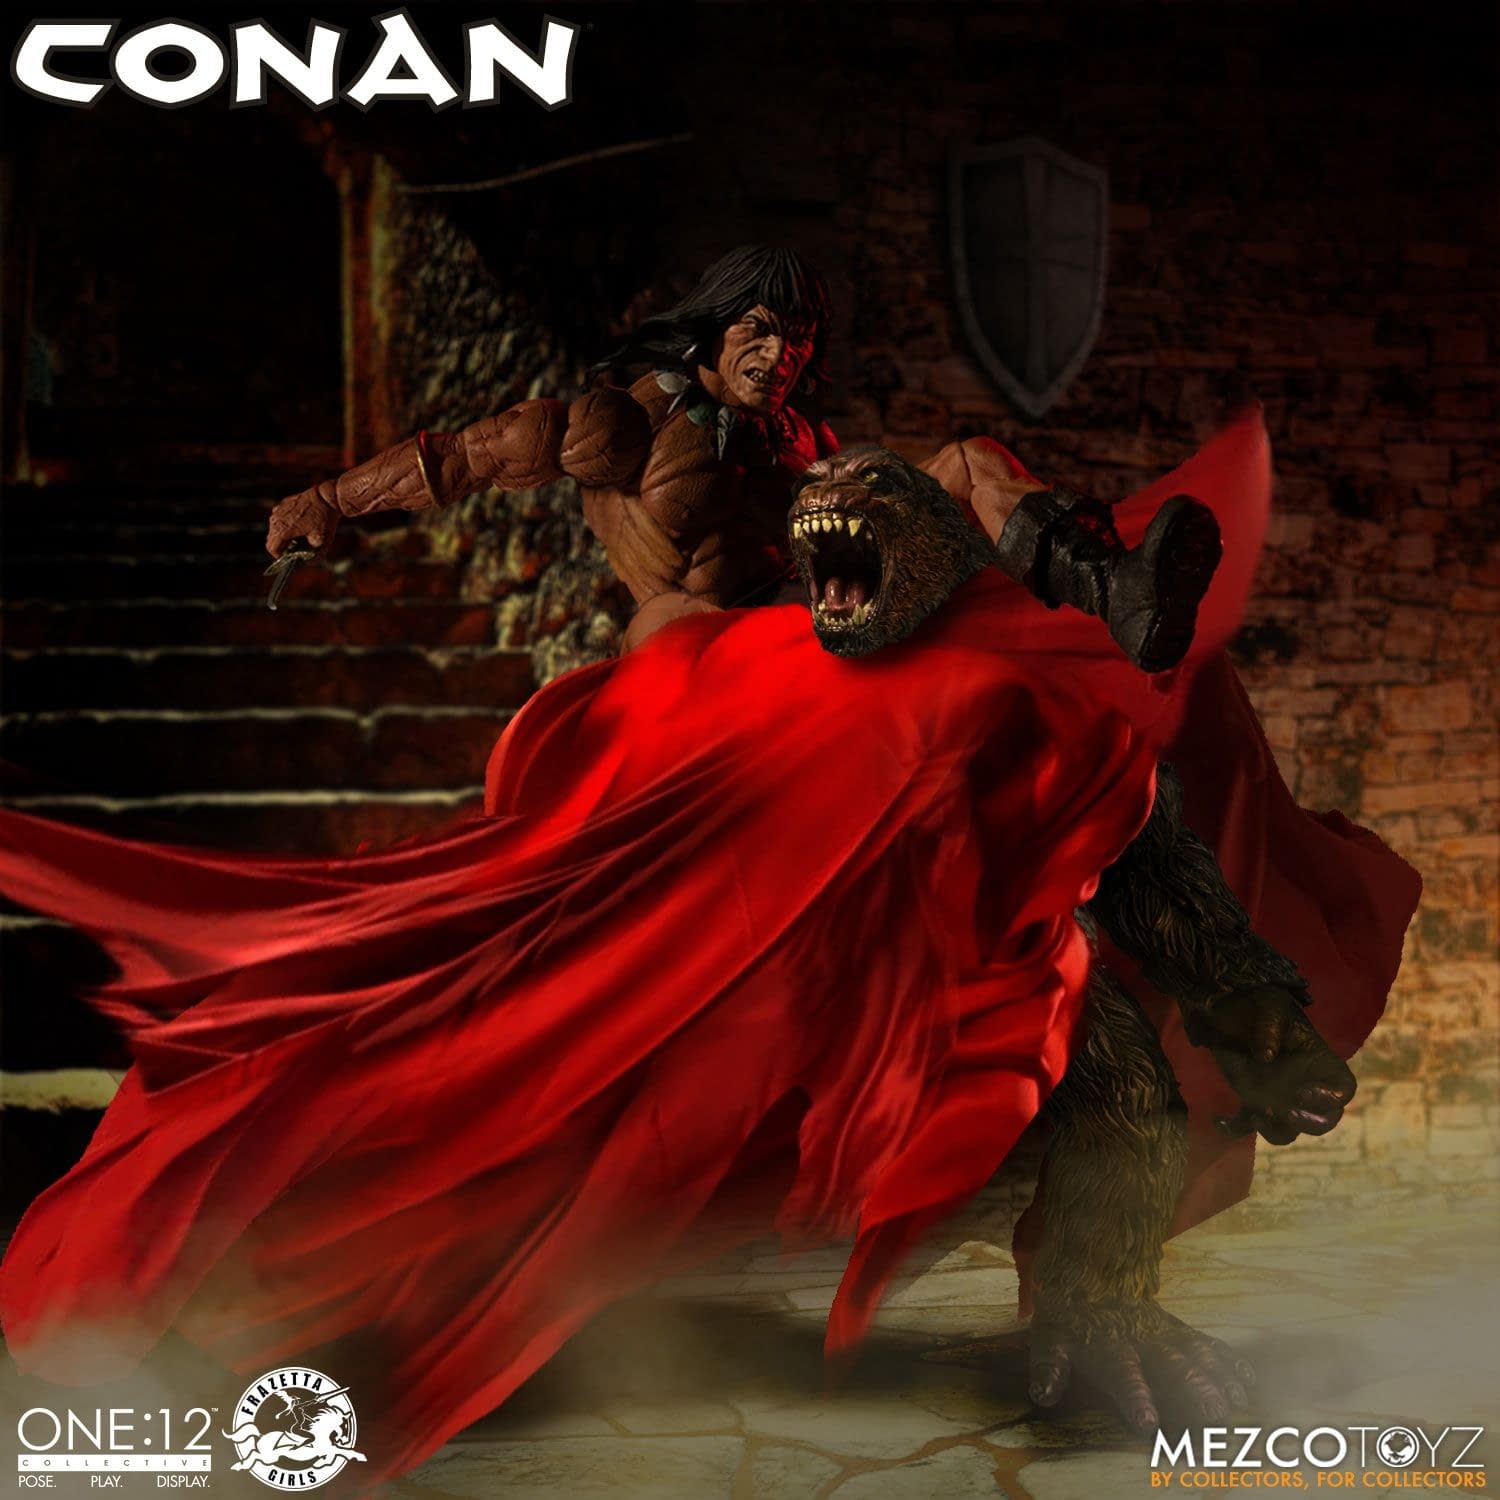 Conan the Barbarian Arrives with New Figure from Mezco Toyz